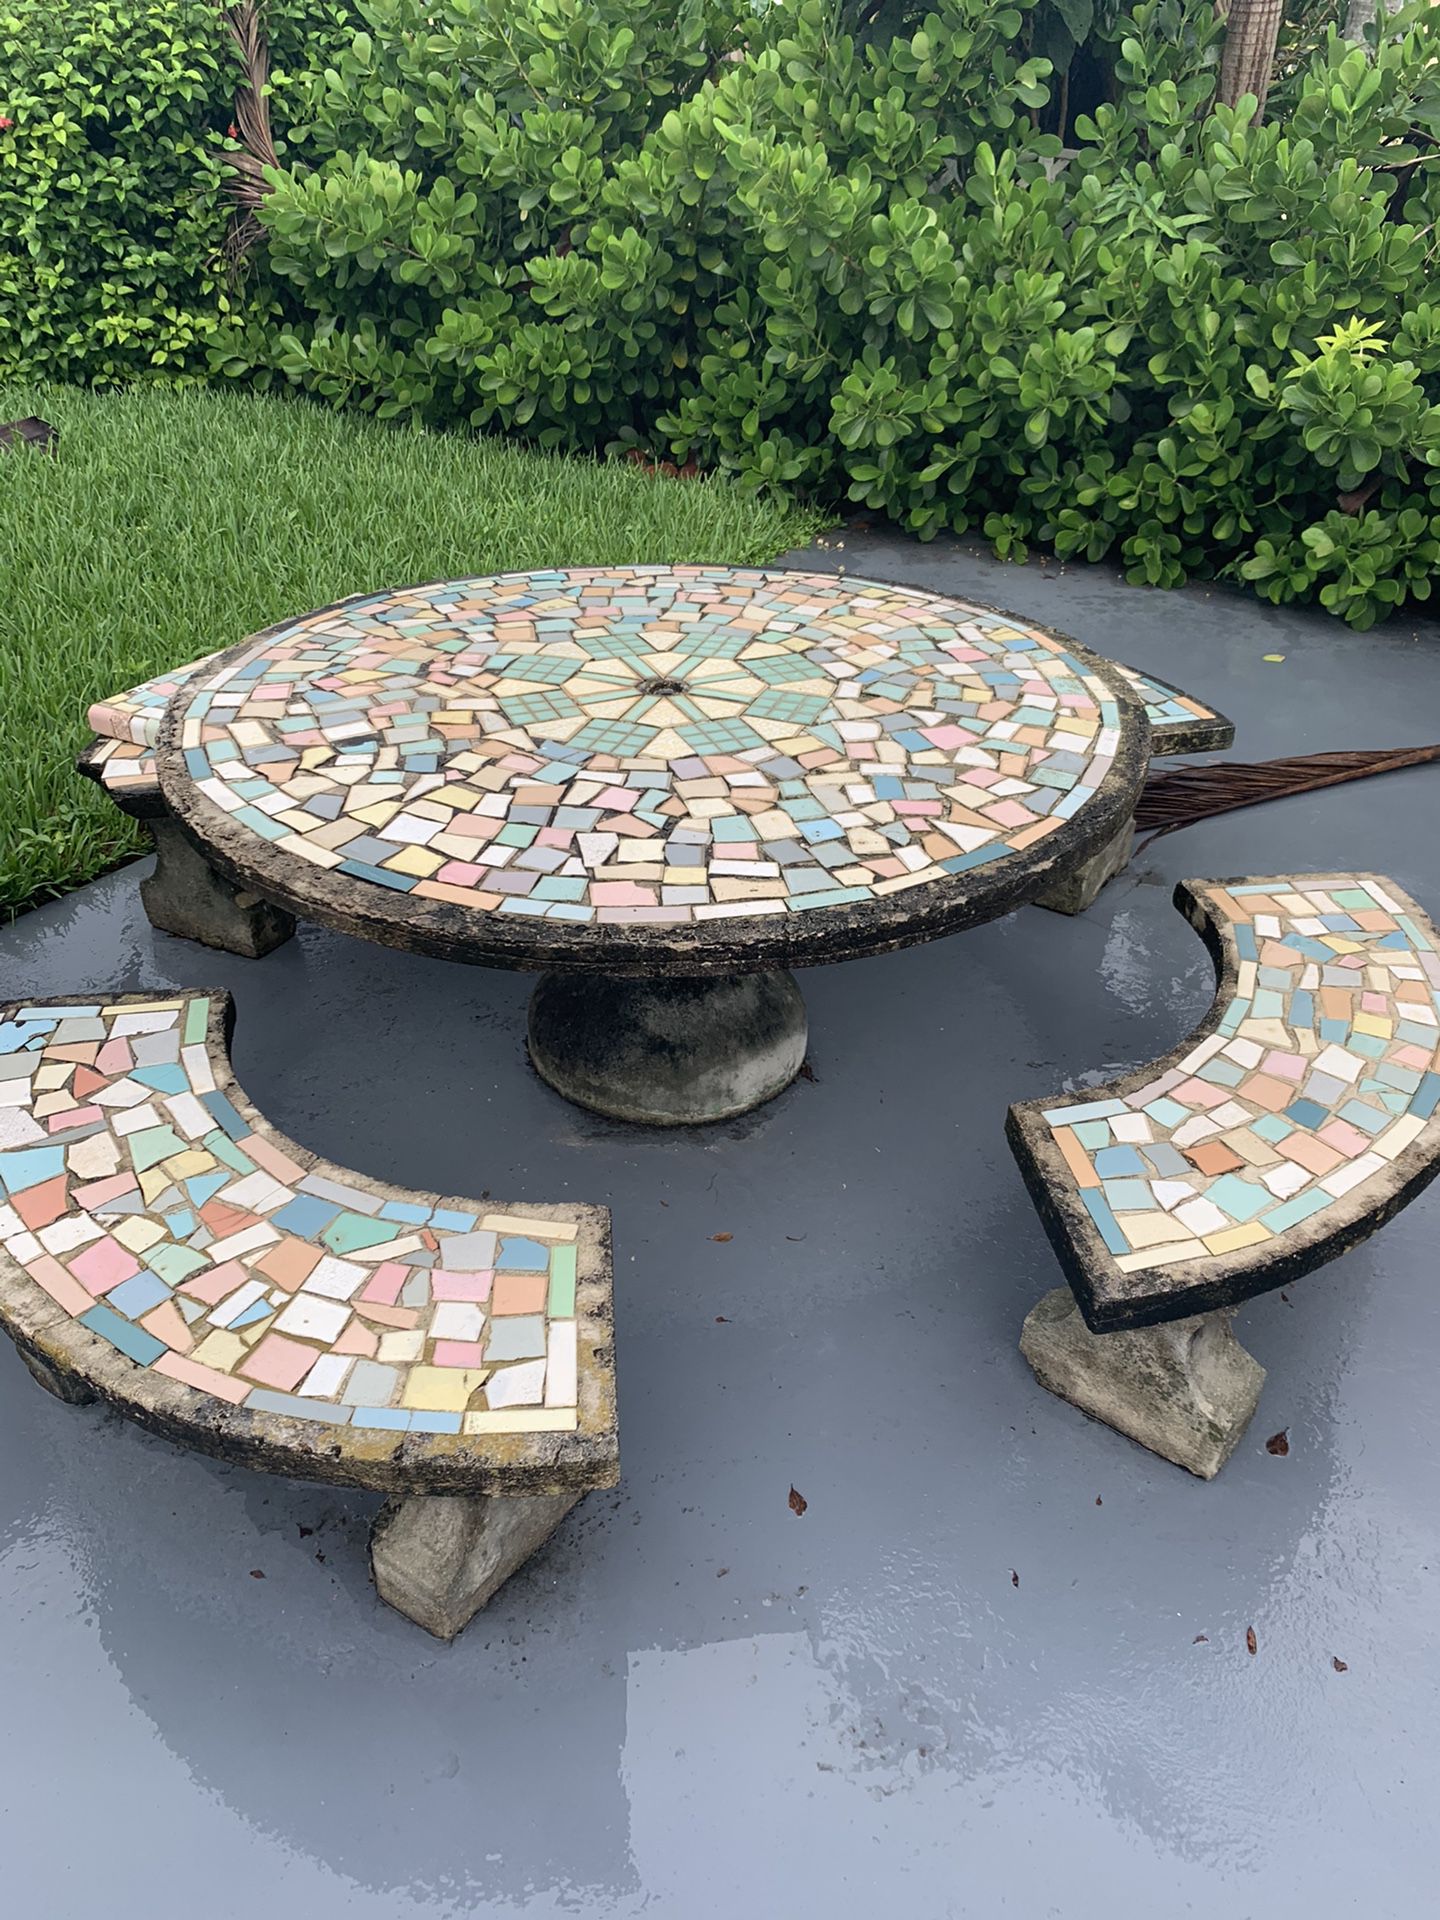 Free Patio Table: Bring a truck-Concrete Table EXTREMELY HEAVY